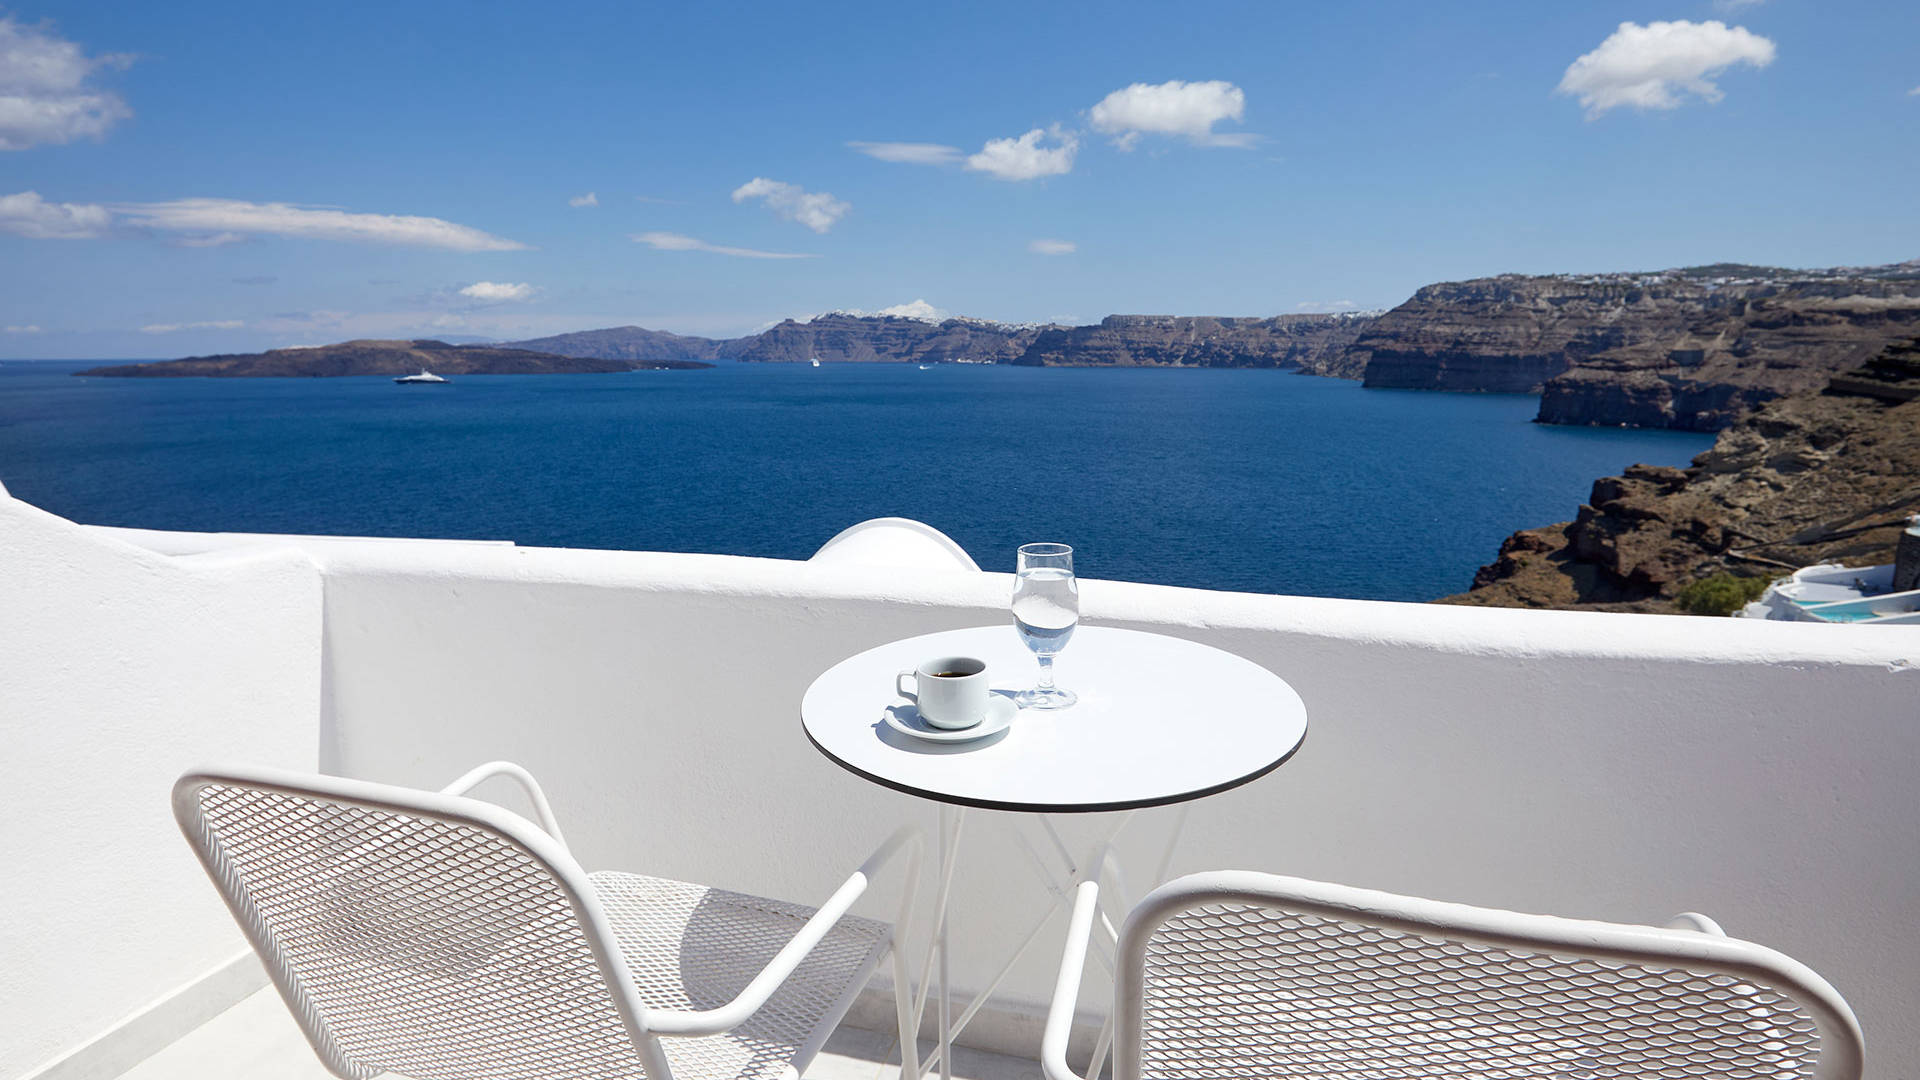 
Santorini View Hotel with a caldera view balcony, with white table for coffee